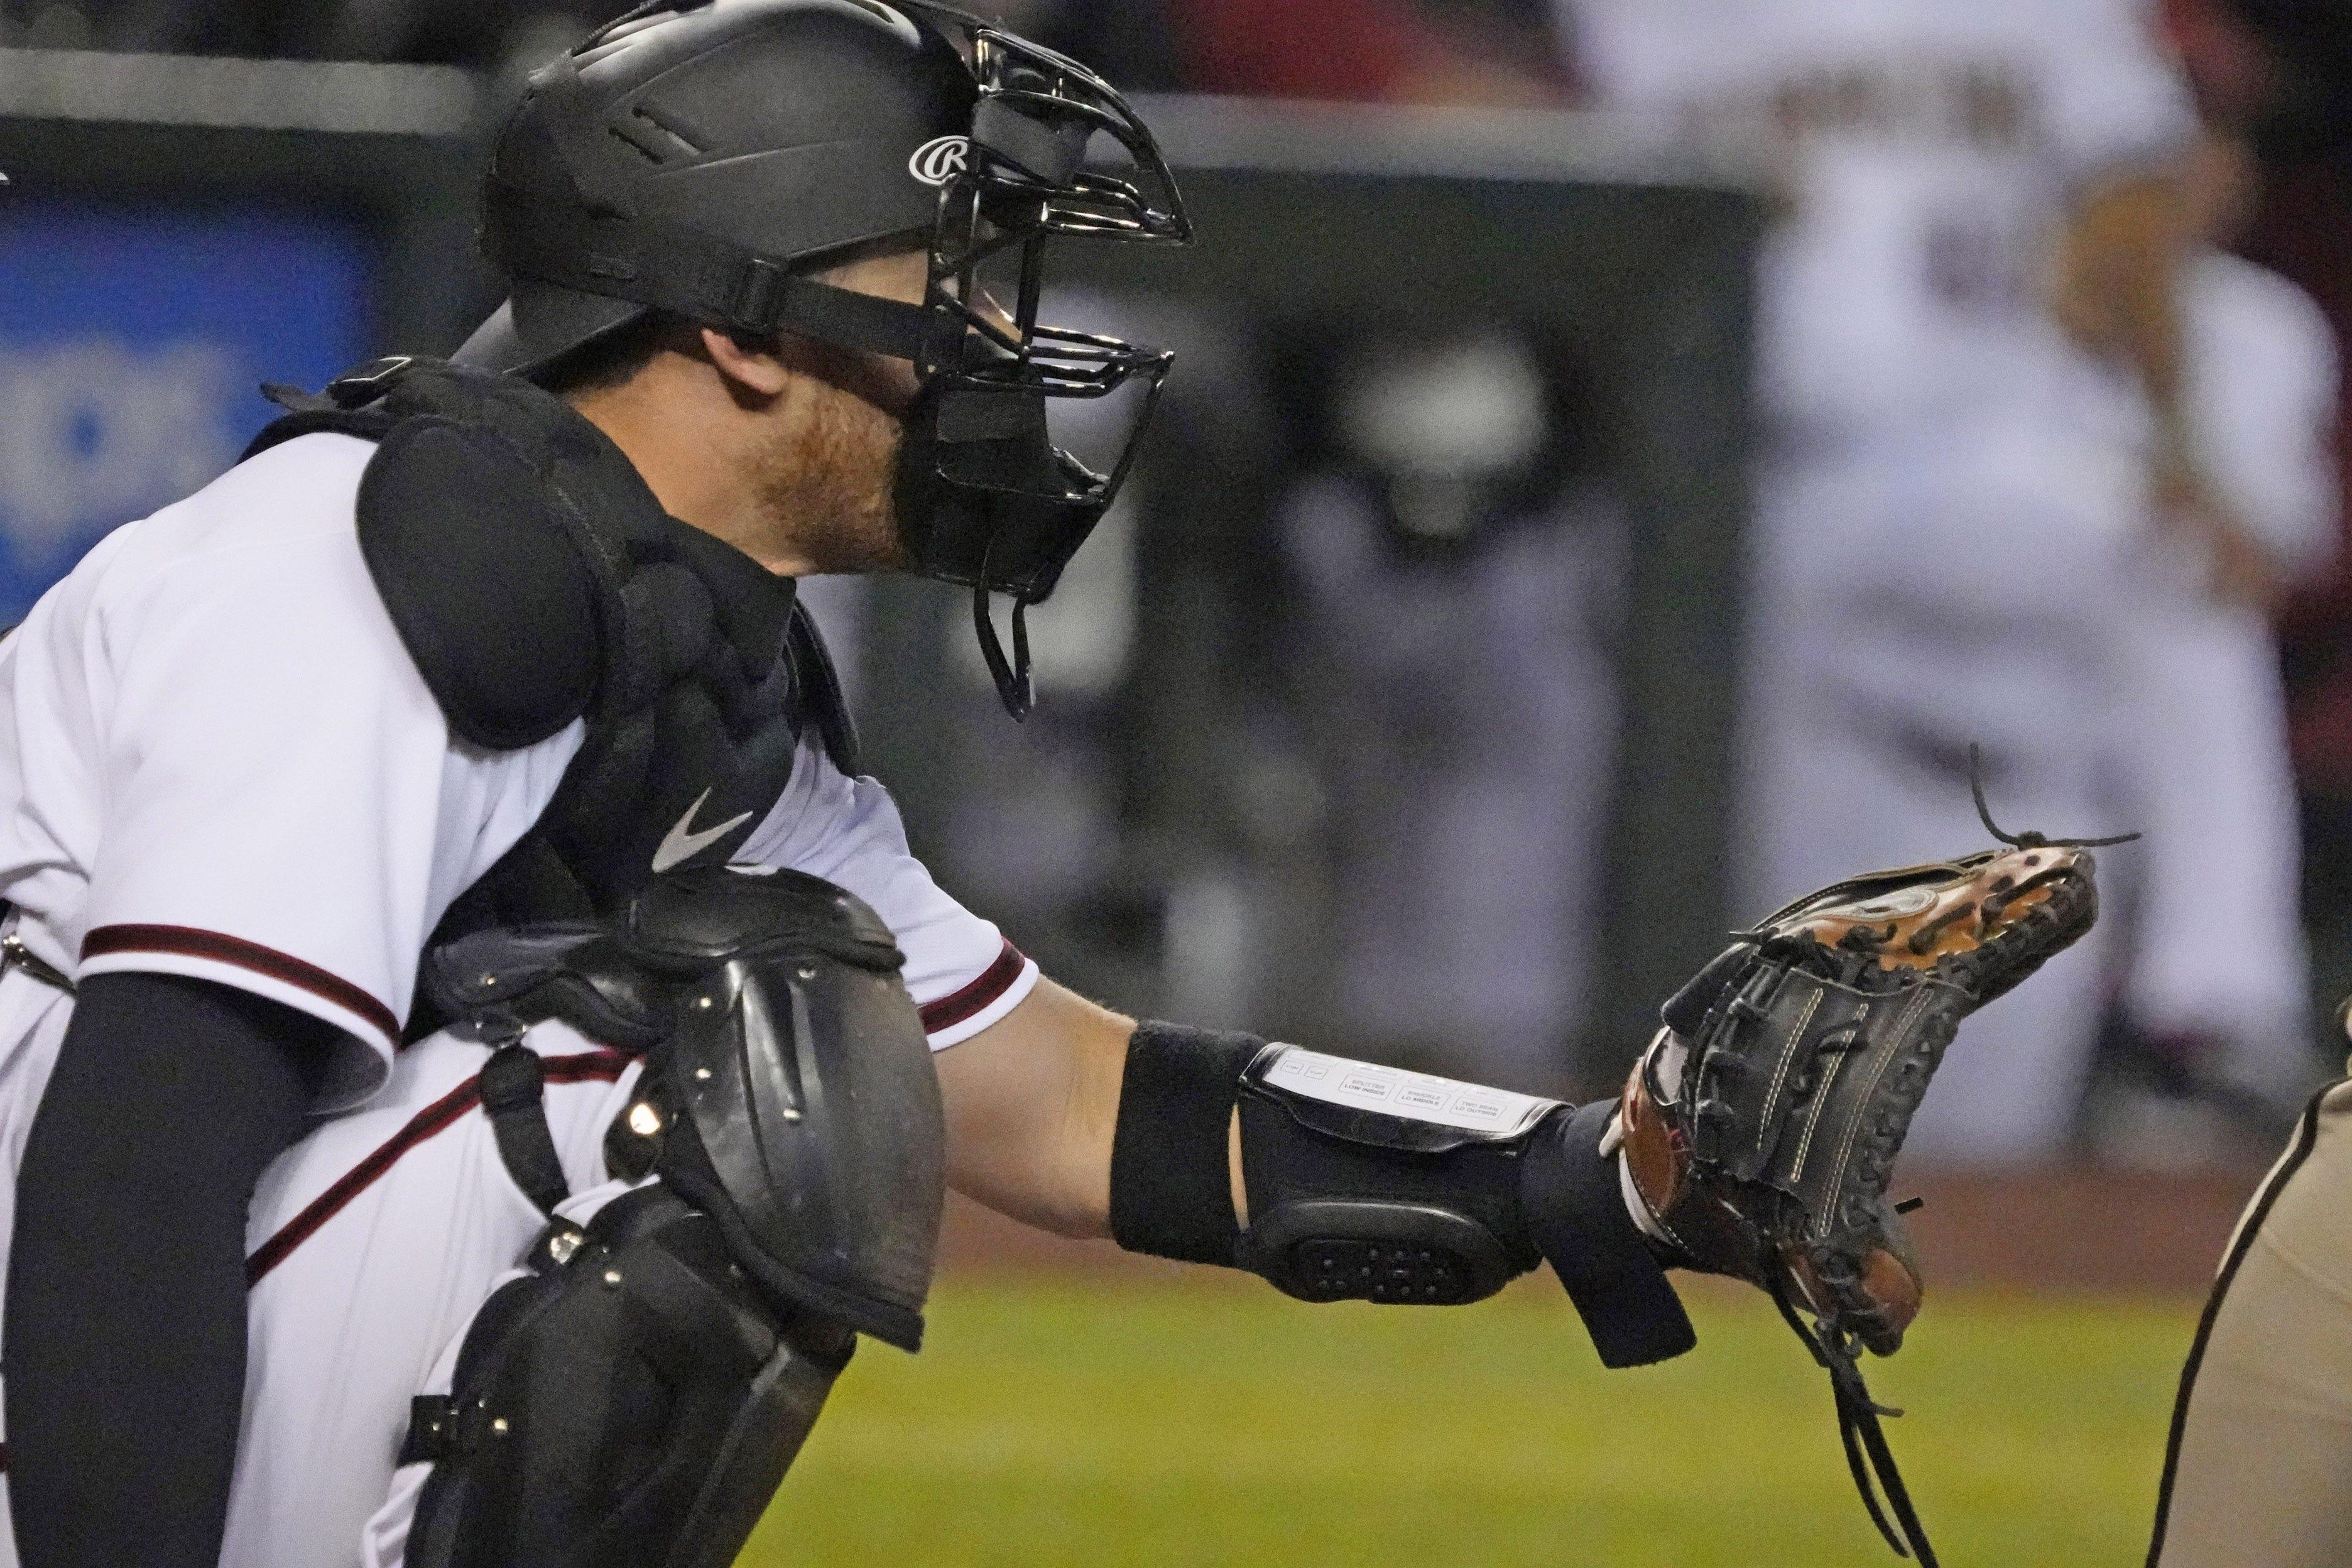 Arizona Diamondbacks catcher Carson Kelly (18) wears a PitchCom during opening day against the San Diego Padres at Chase Field in Phoenix on April 7, 2022. A PitchCom is a pitcher and catch communication device.